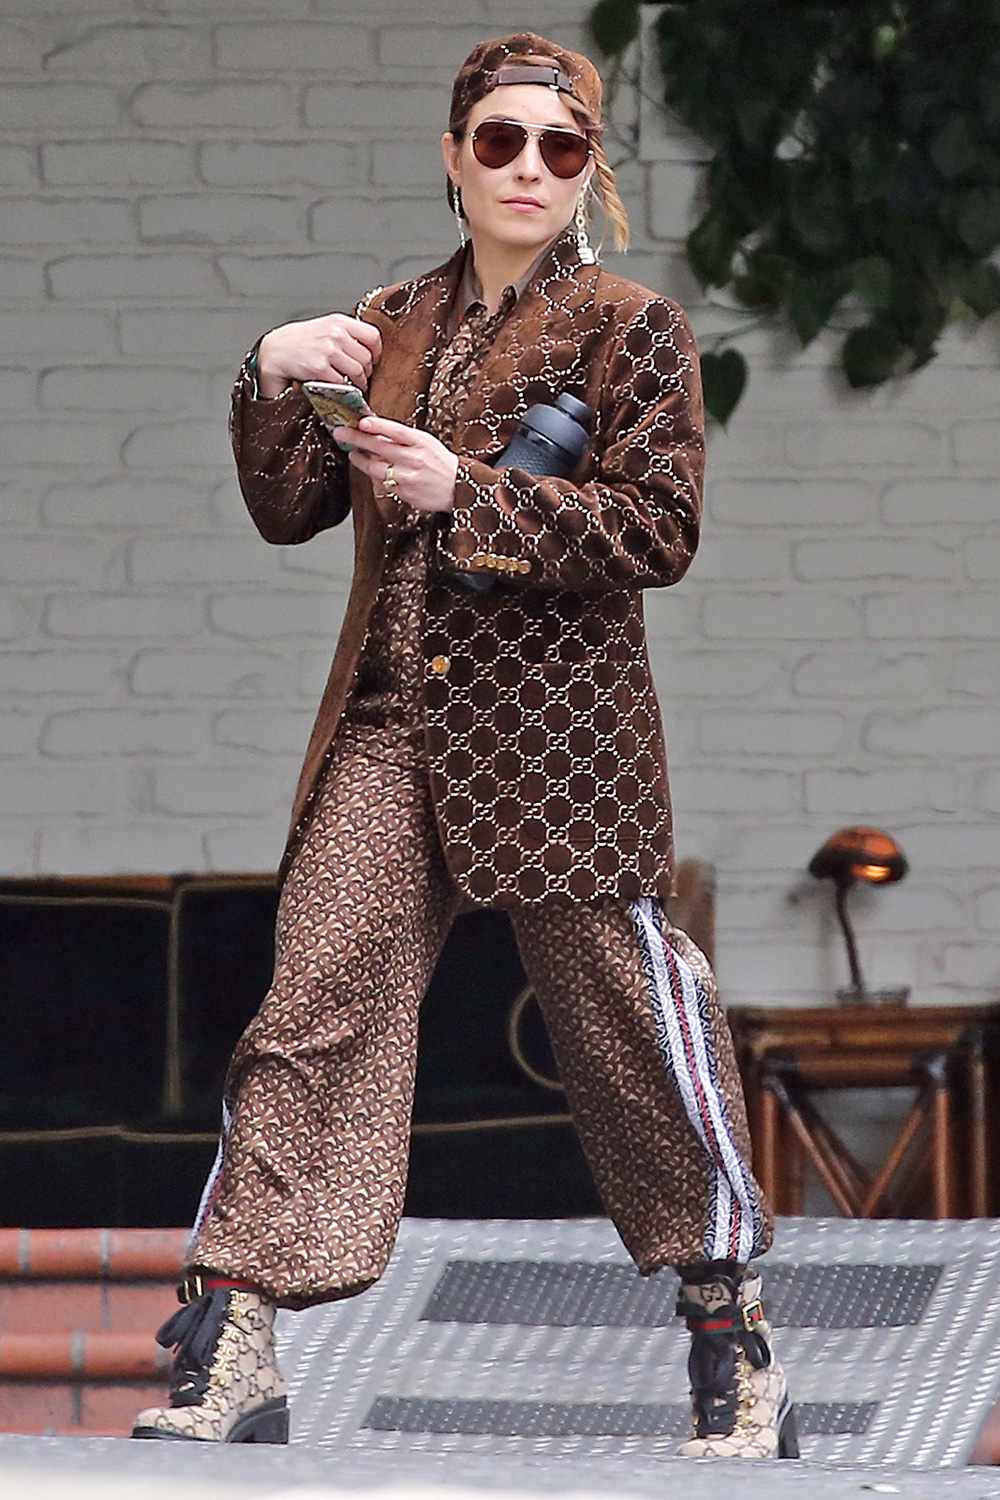 Noomi Rapace from the Girl with the Dragon Tattoo movie's steps out in head-to-toe Gucci in Los Angeles, CA.